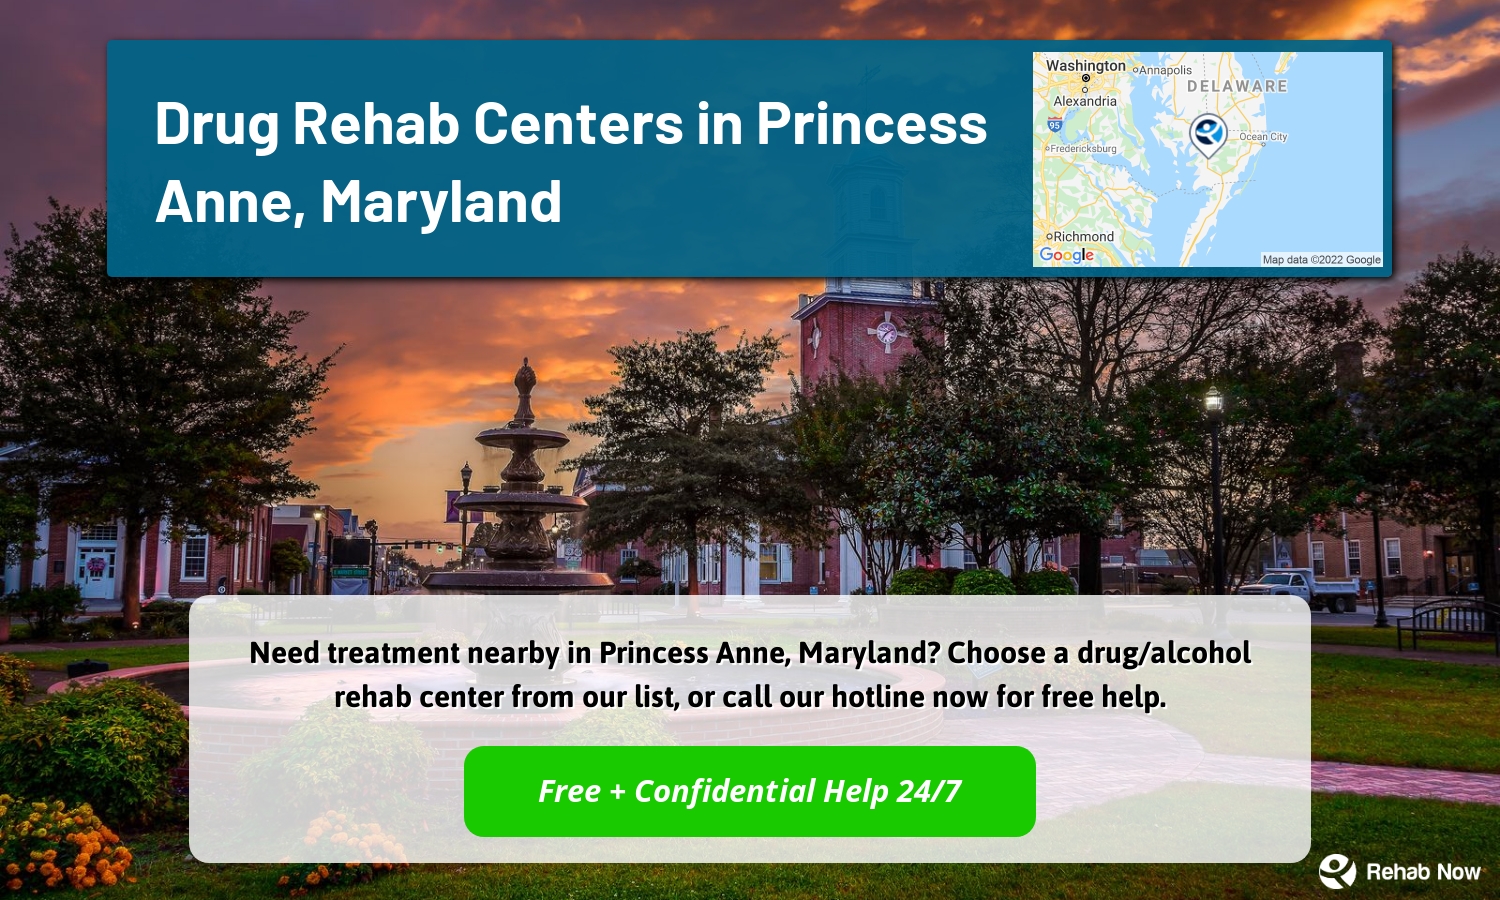 Need treatment nearby in Princess Anne, Maryland? Choose a drug/alcohol rehab center from our list, or call our hotline now for free help.